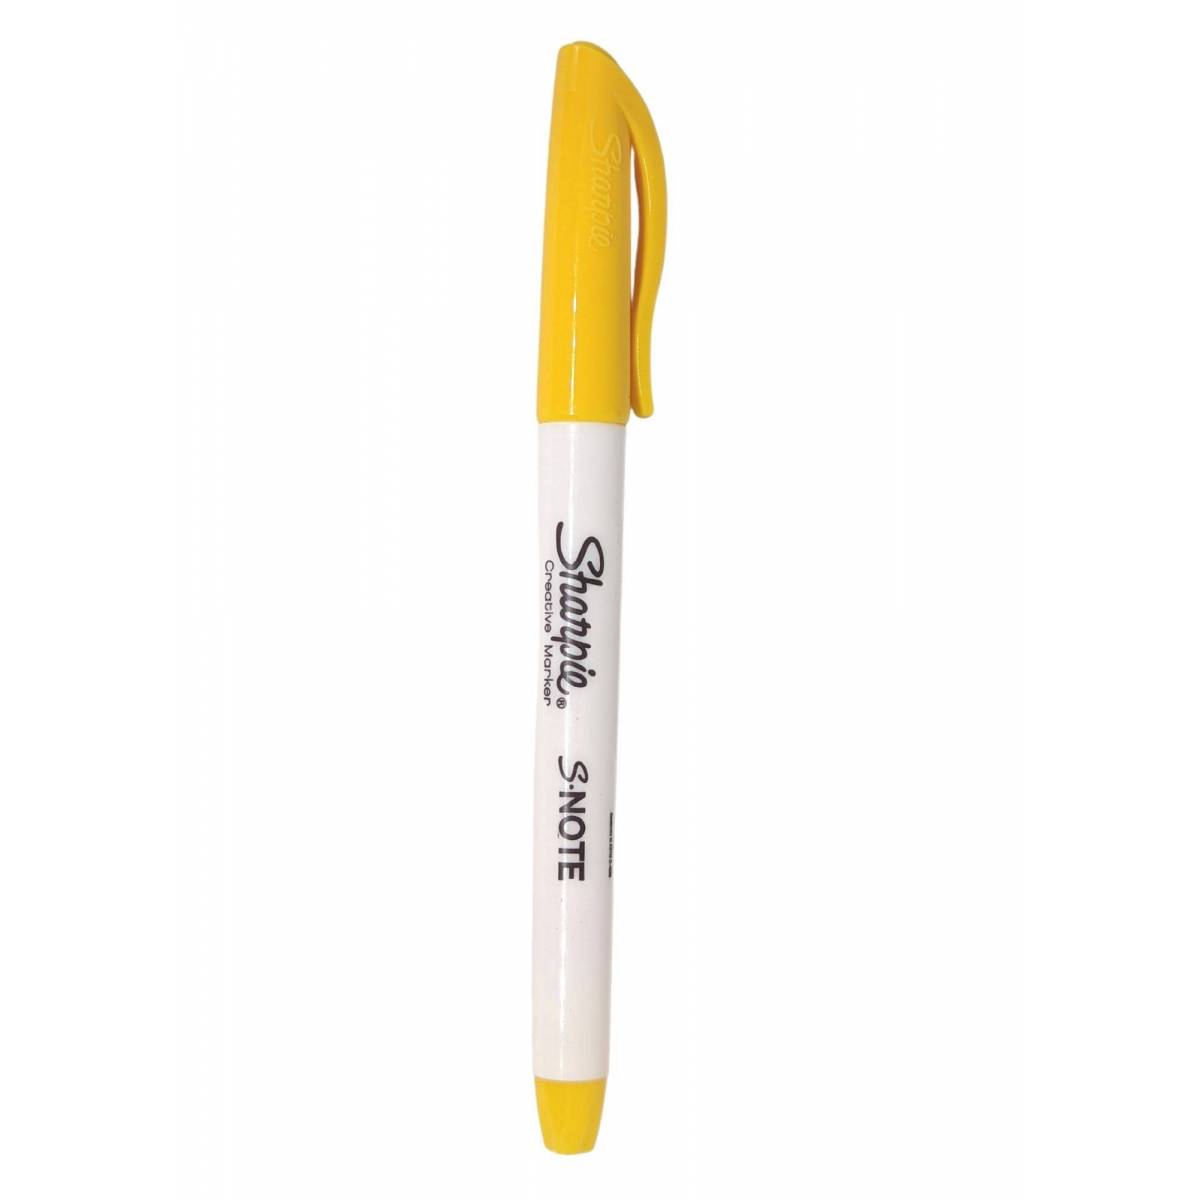 Yellow creative marker with Sharpie S.NOTE 2in1 tip